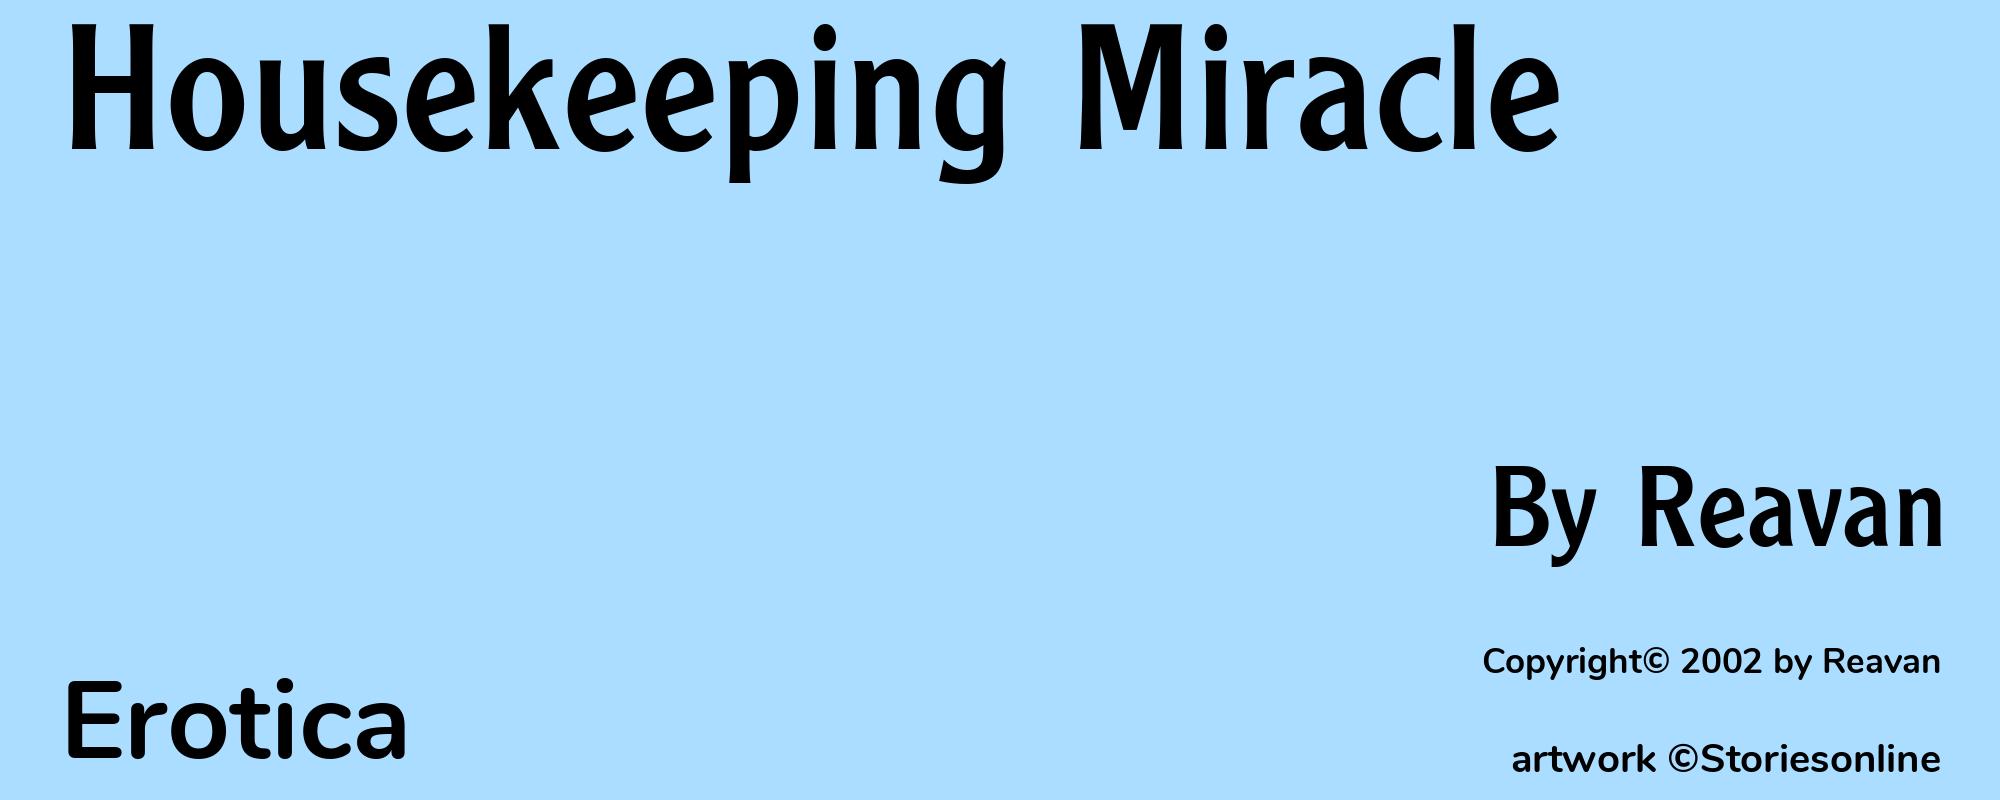 Housekeeping Miracle - Cover